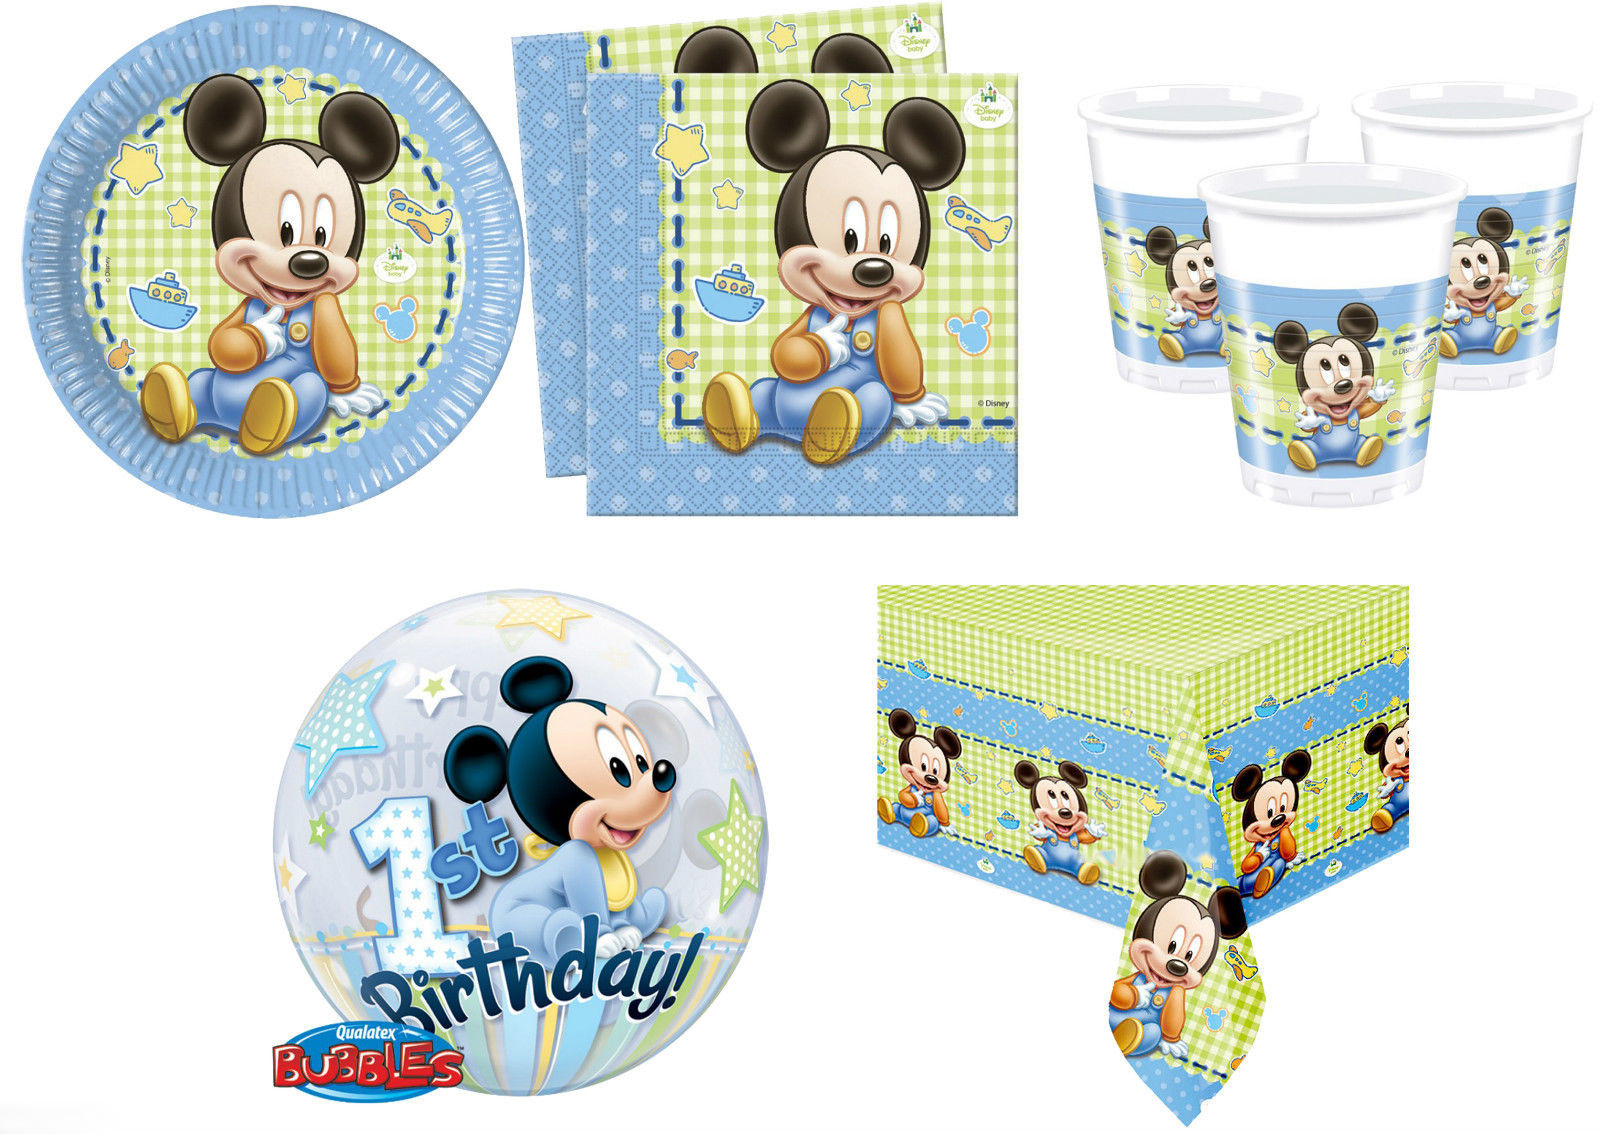 Baby Mickey Mouse Party Decorations
 LAIMI Baby Mickey Mouse Birthday Party Supplies